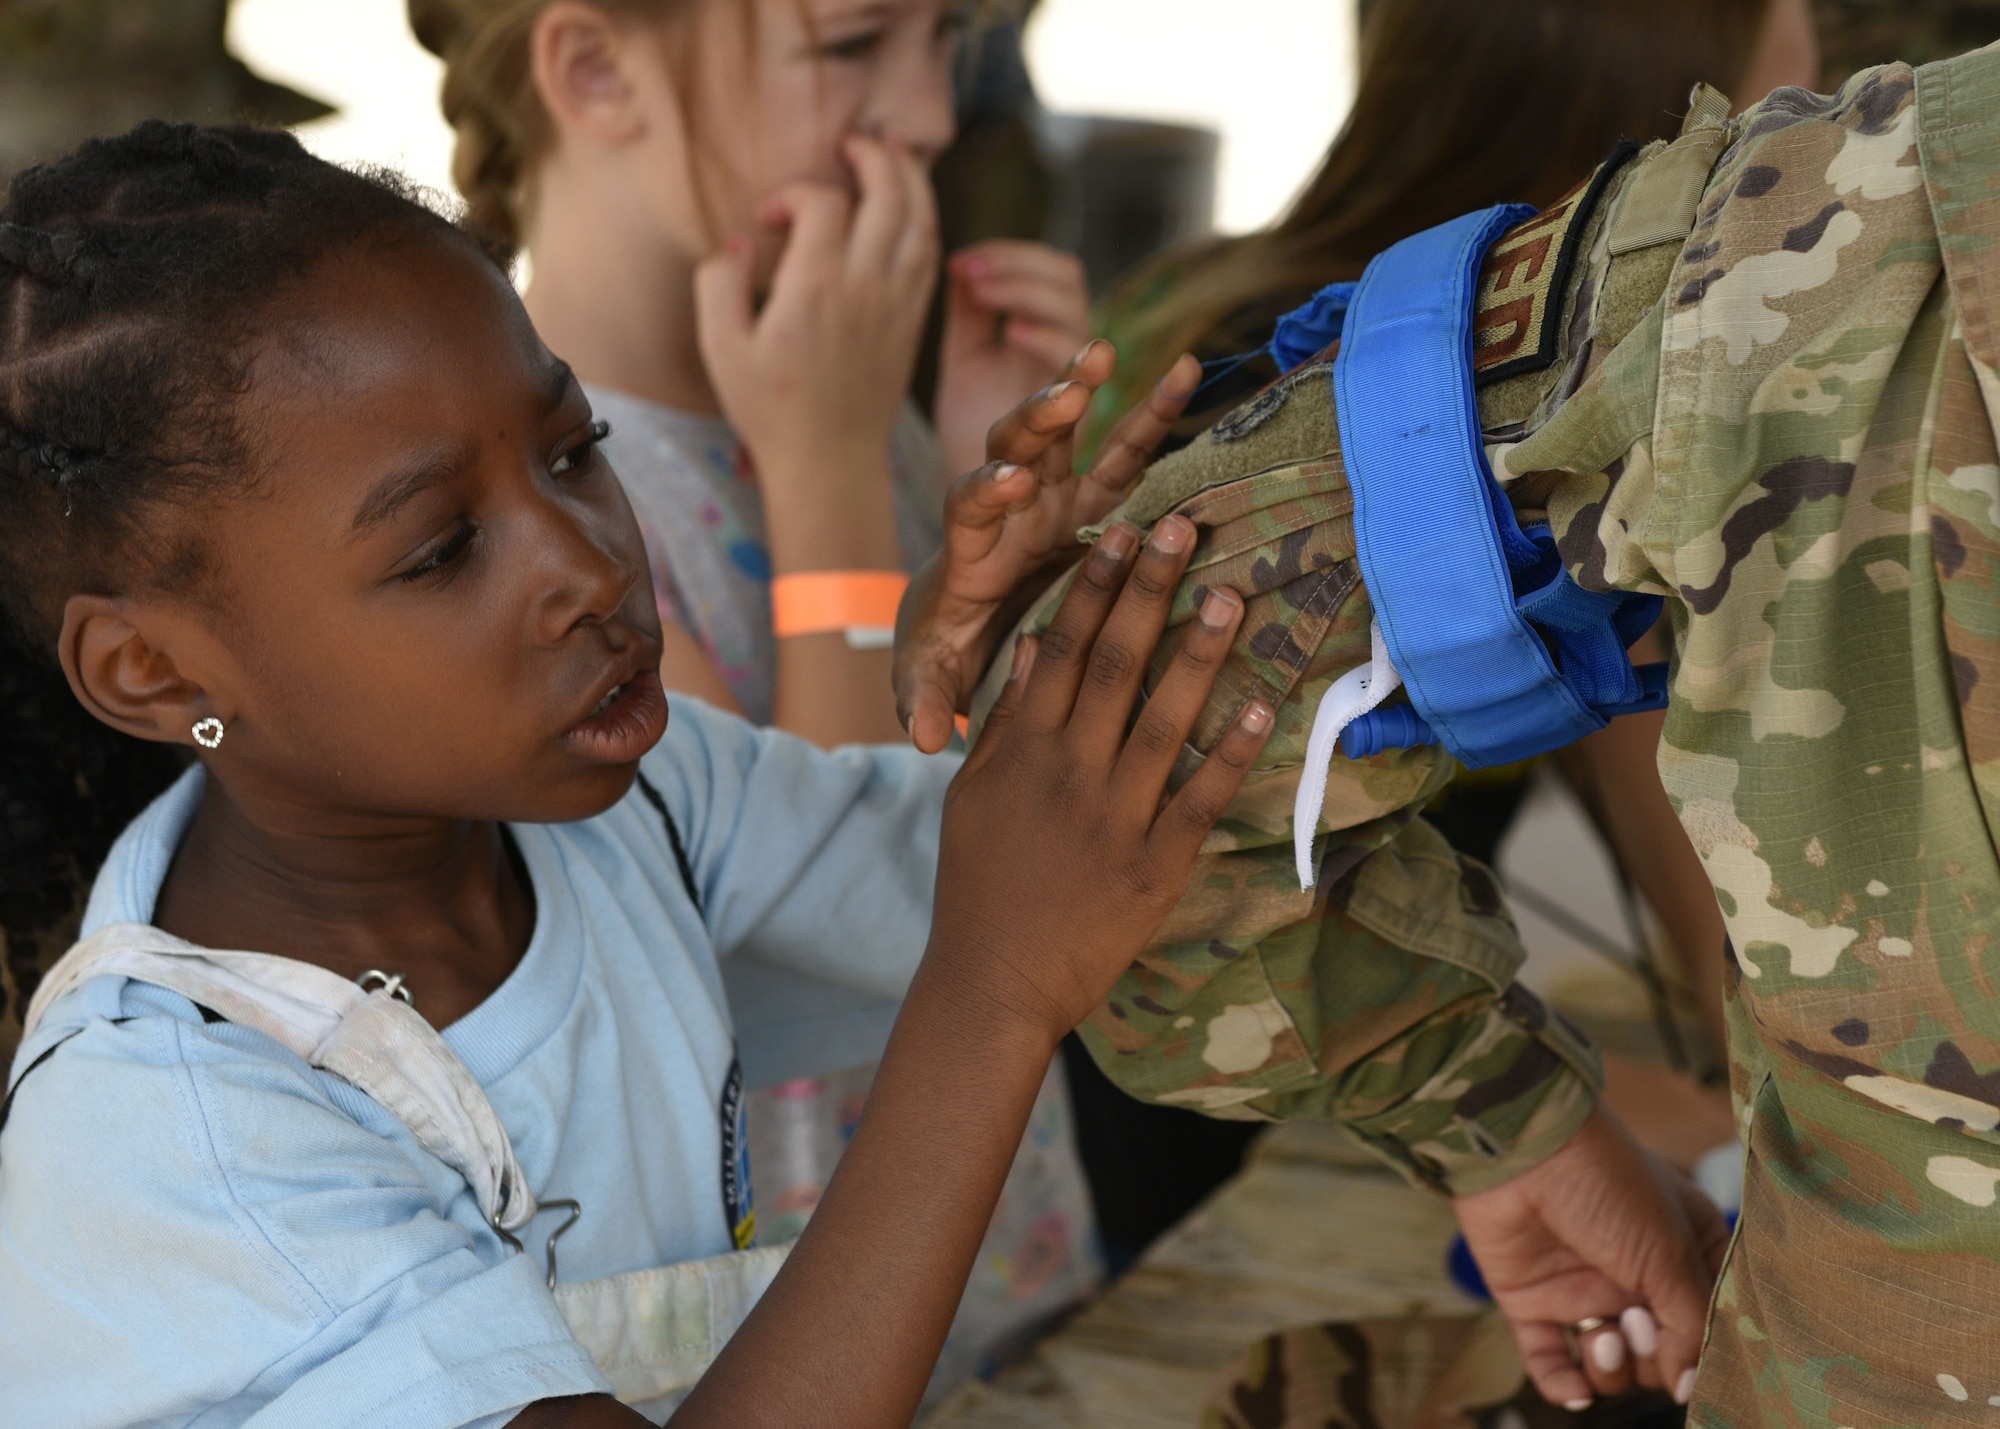 An Operation K.I.D.S. (Kids Investigating Deployment Services) participant fastens a tourniquet to a member of the 17th Medical Group at Forward Operating Base Sentinel, Goodfellow Air Force Base, Texas, April 27, 2024. Kids learned the basics of hand-to-hand combat, first aid, room clearing, and more as they simulated what deployed life might be like for their military parents. (U.S. Air Force photo by 2nd Lt. Harris Hillstead)